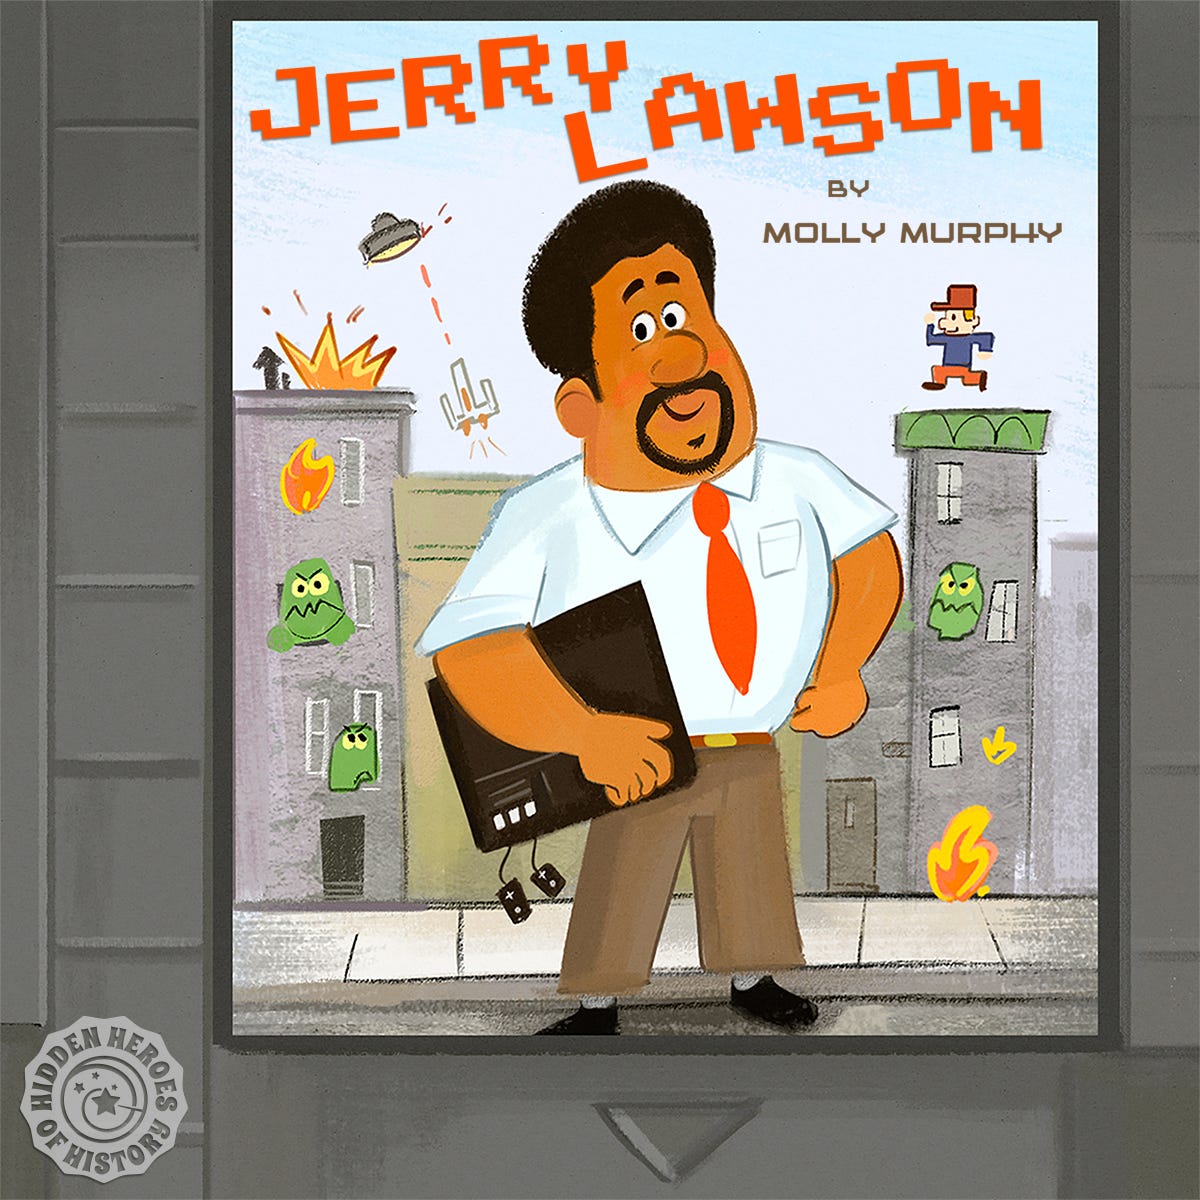 Google game honors Black video game pioneer Jerry Lawson on his birthday